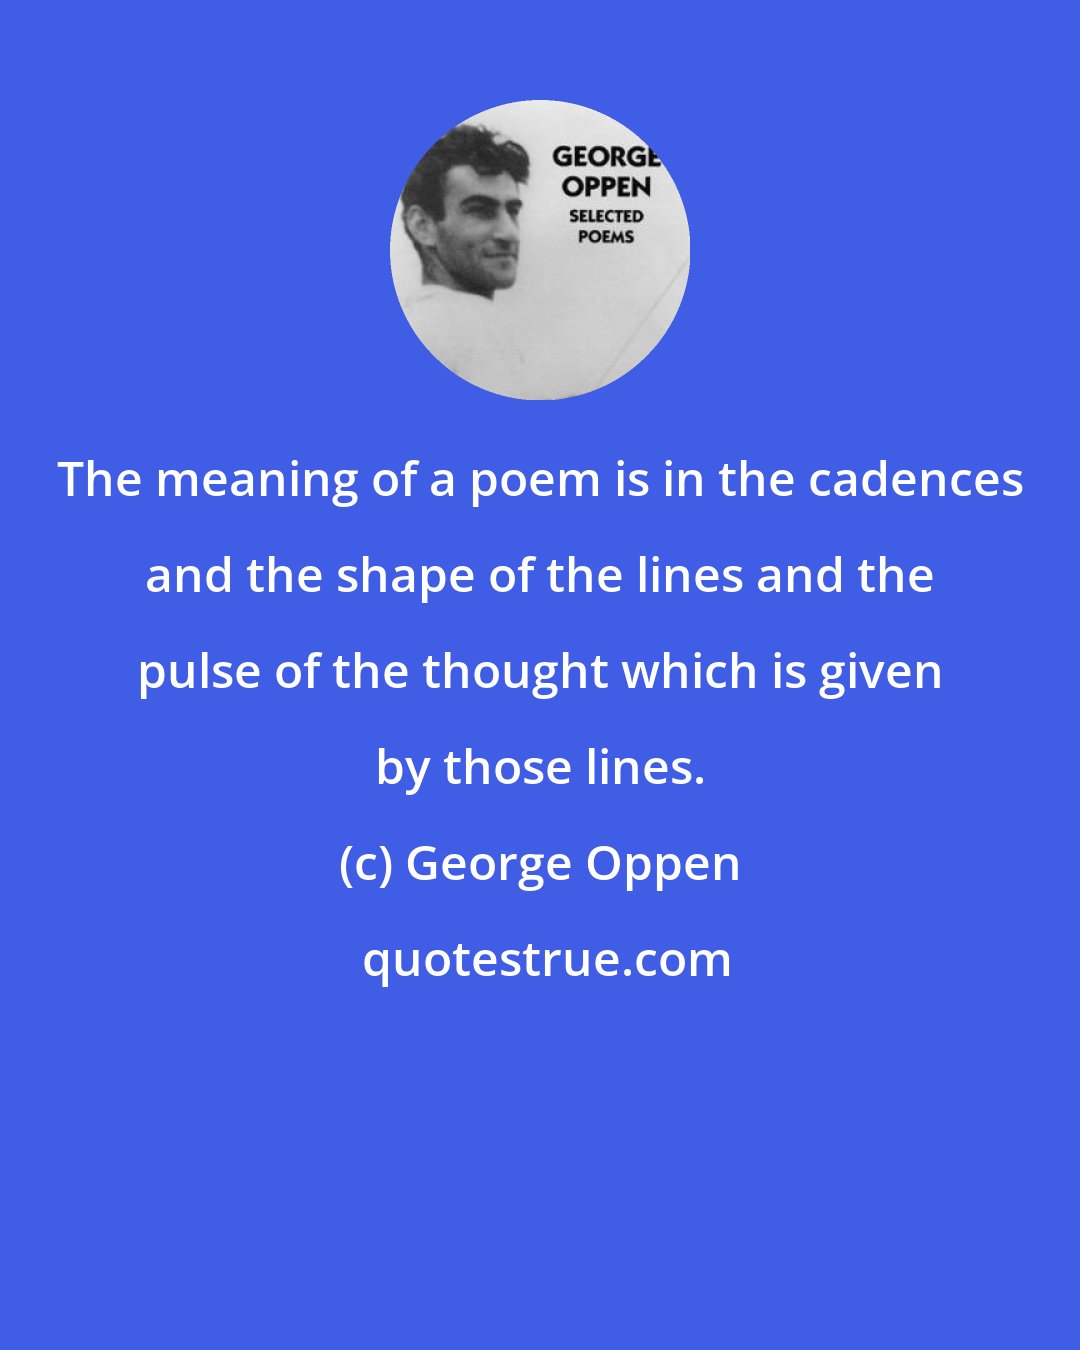 George Oppen: The meaning of a poem is in the cadences and the shape of the lines and the pulse of the thought which is given by those lines.